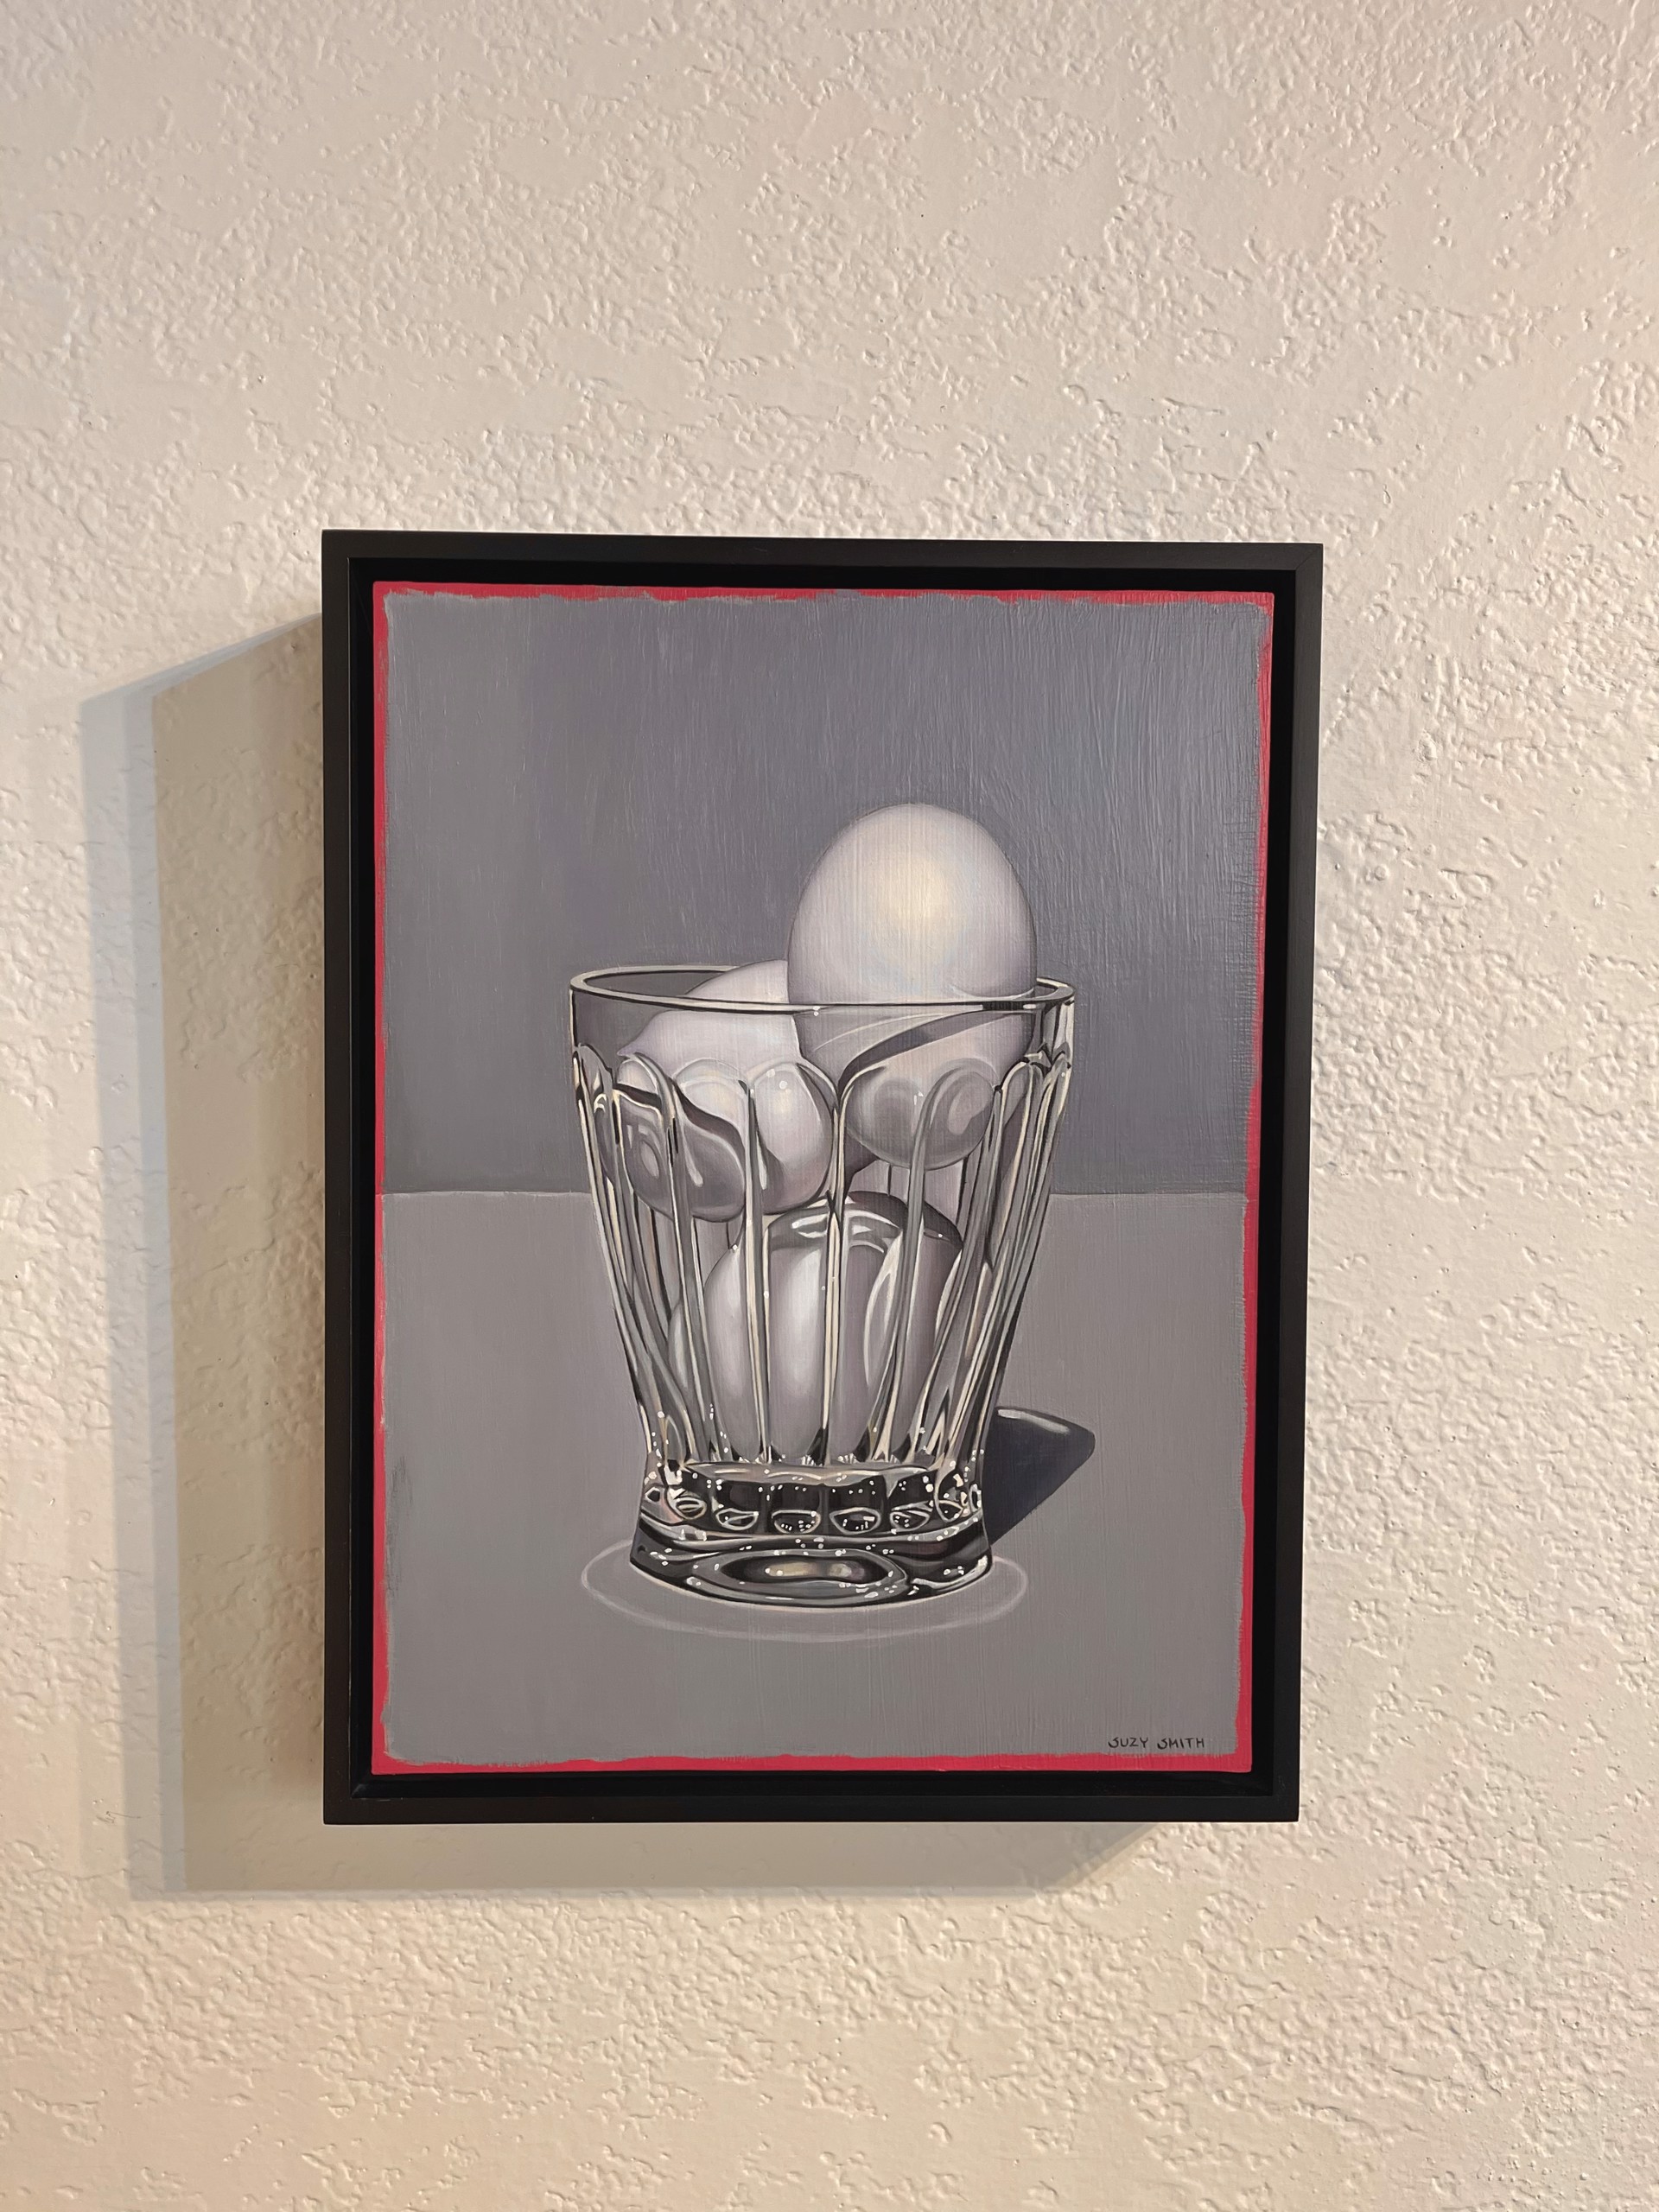 Eggs in Glass by Suzy Smith